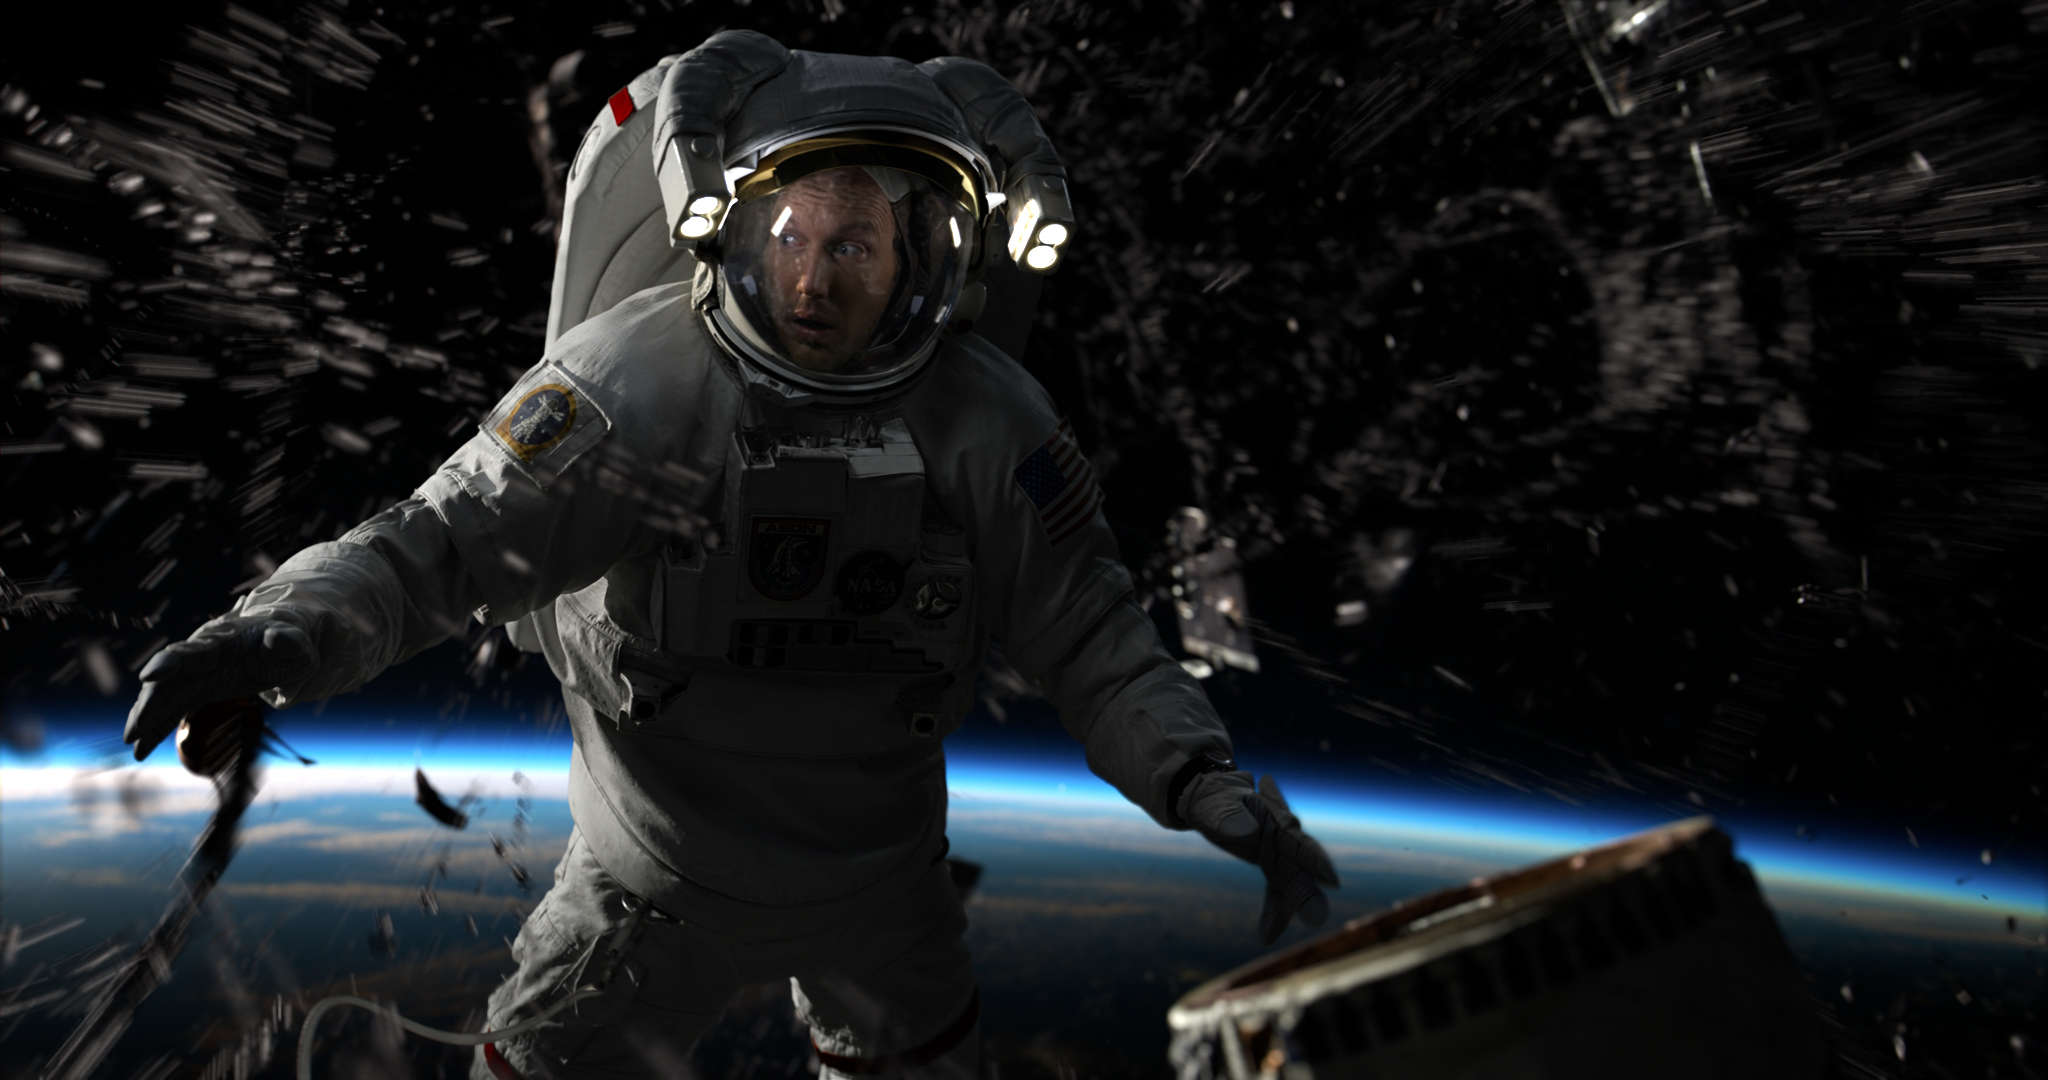 Patrick Wilson portrays astronaut “Brian Harper” surrounded by a mysterious force in the sci-fi epic MOONFALL.